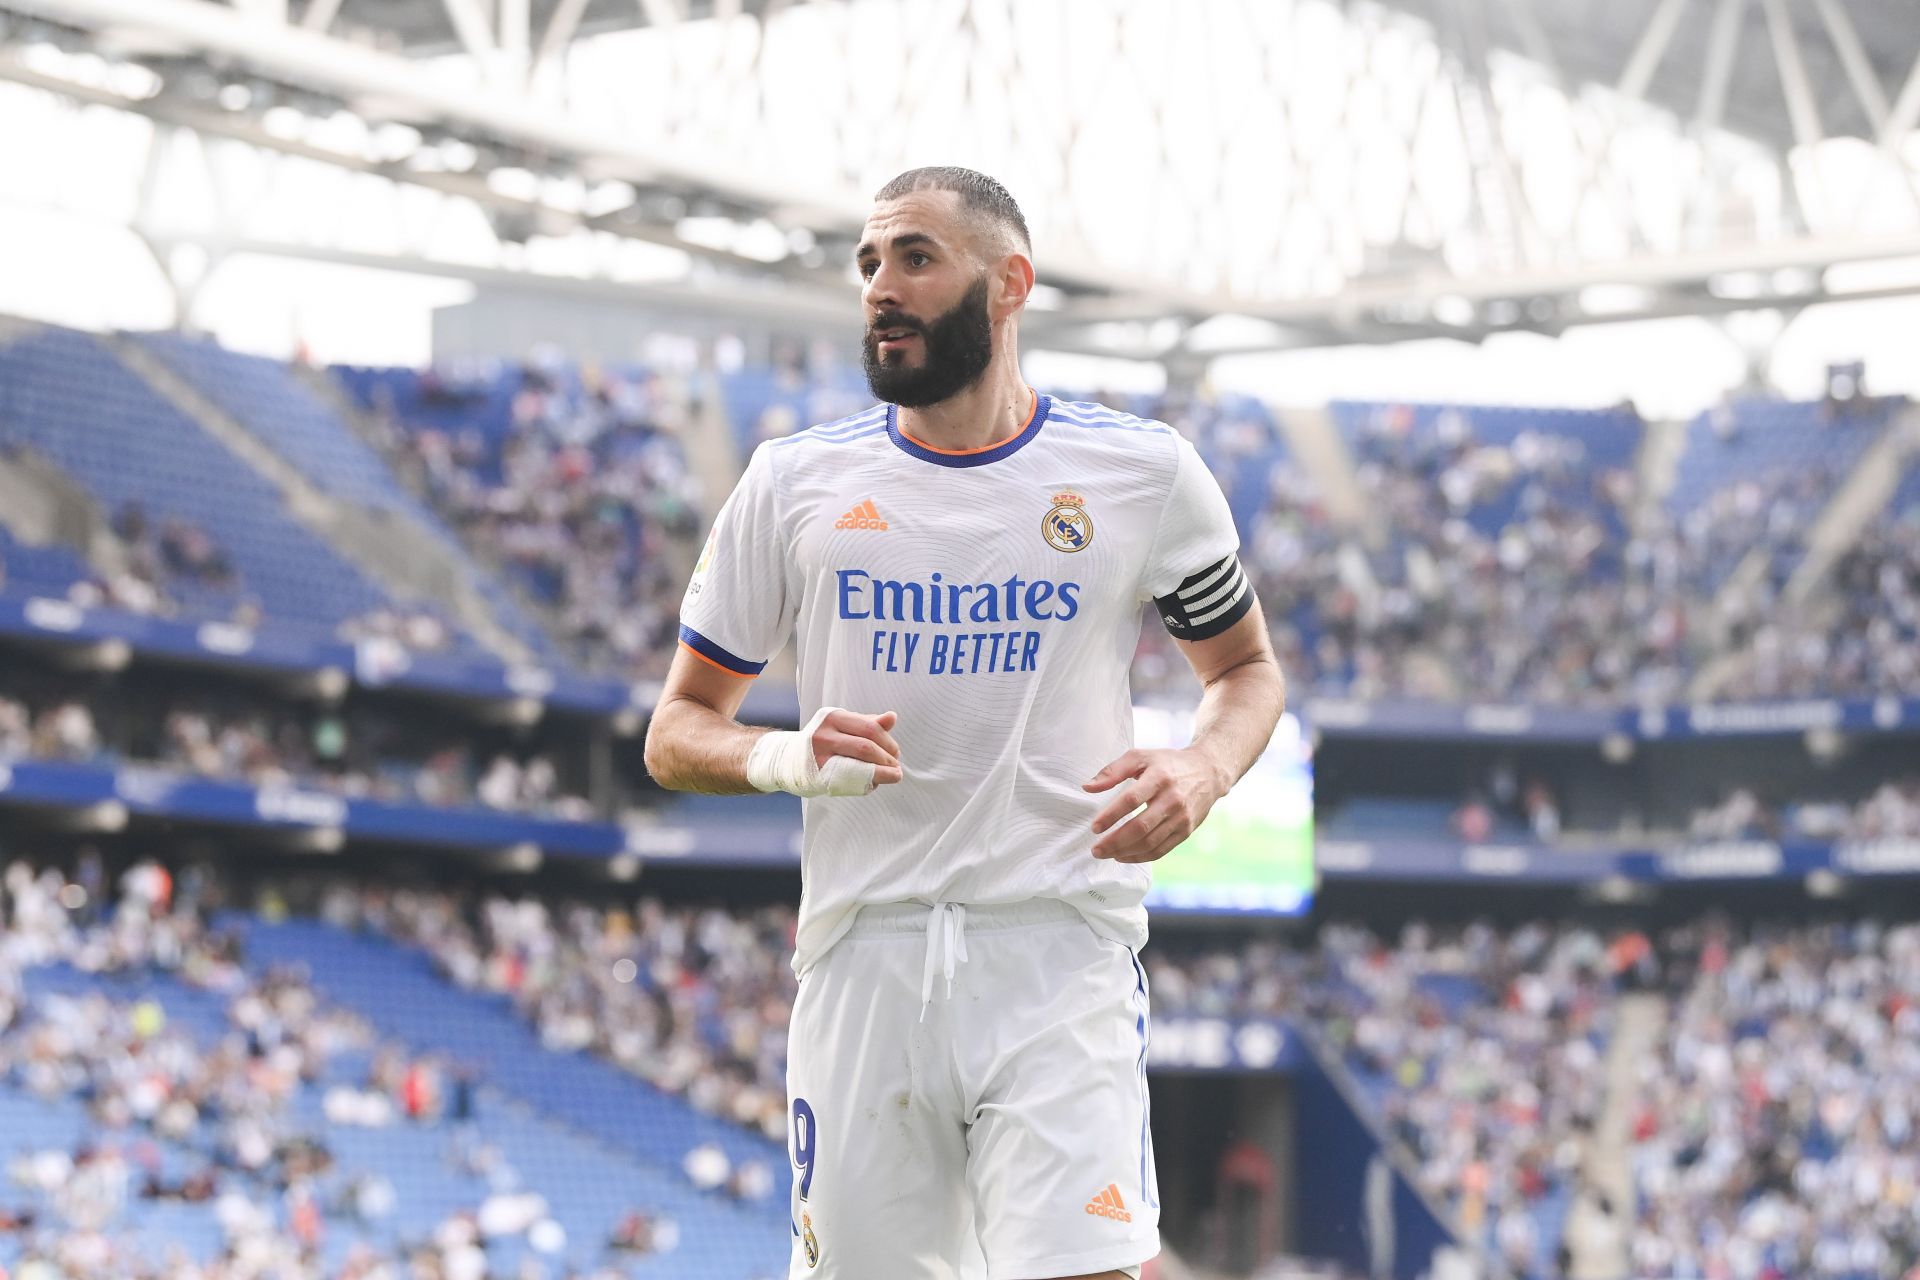 Benzema won the UEFA Nations League with France, his first trophy on return